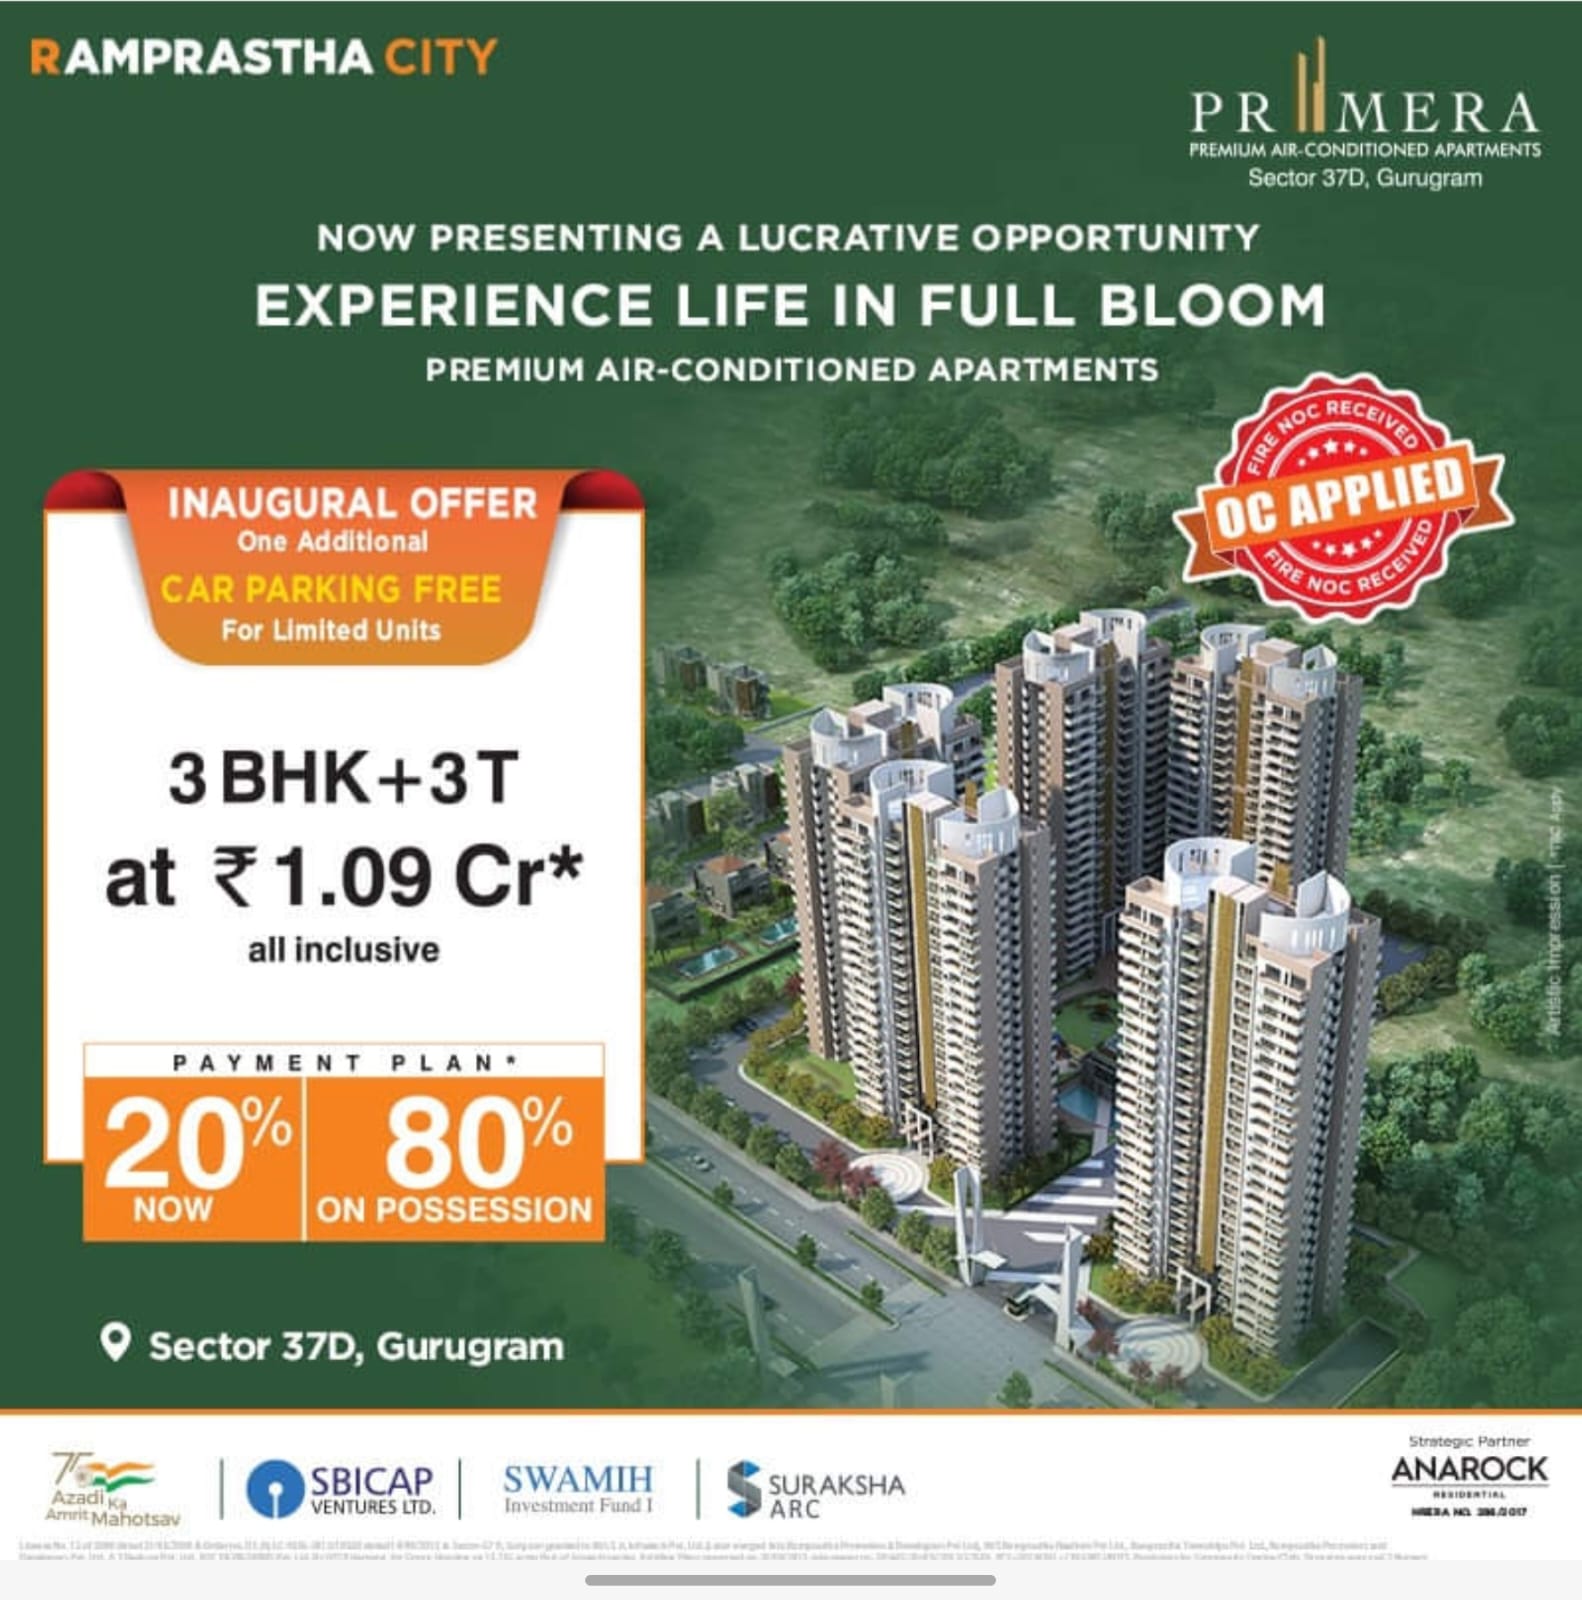 Payment plan 20% now and 80% on possession at Ramprastha Primera, Gurgaon Update